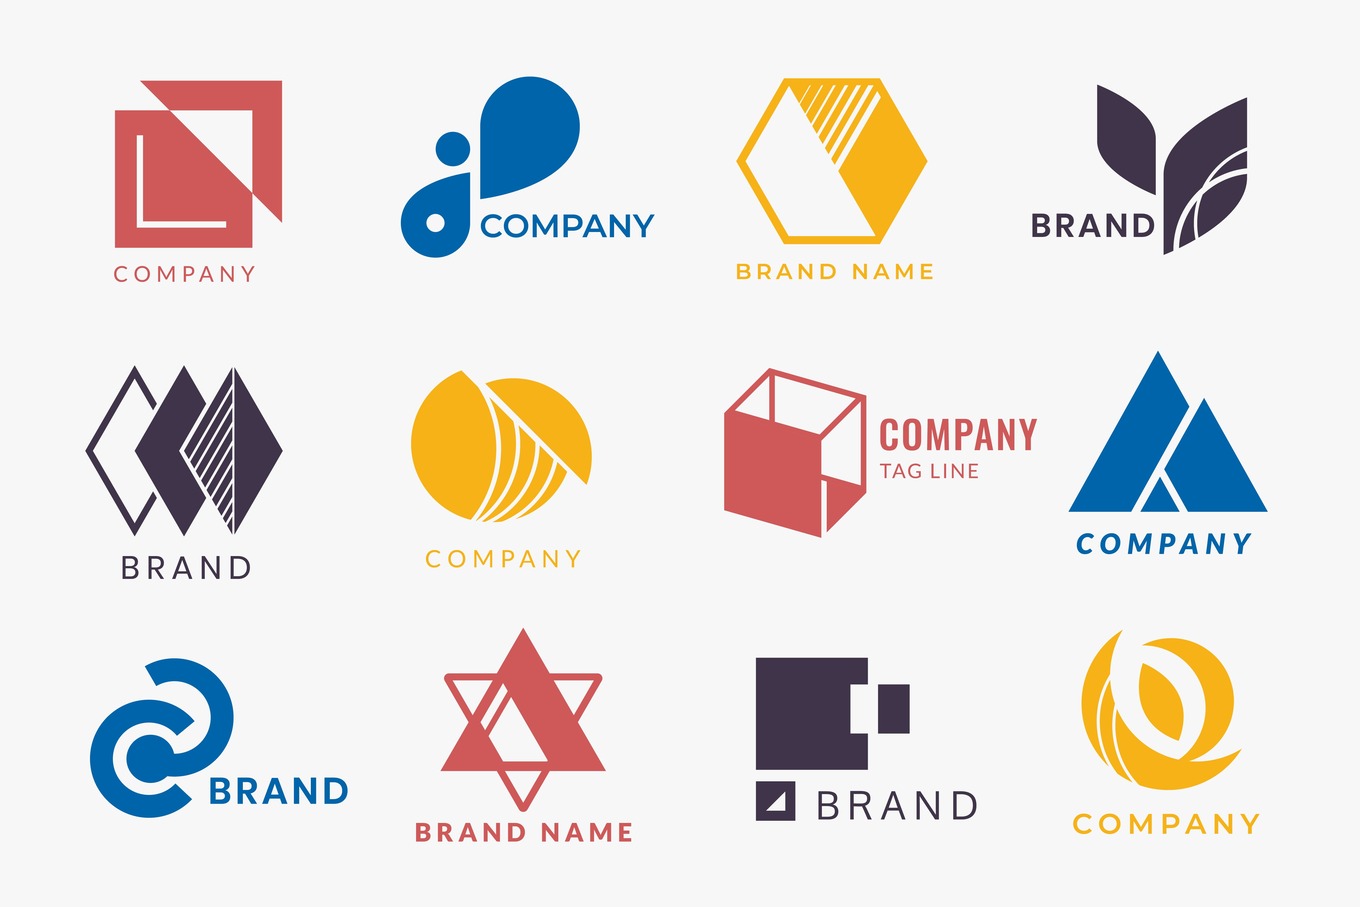 How To Design a Logo For Your Business - SWS Digital Agency